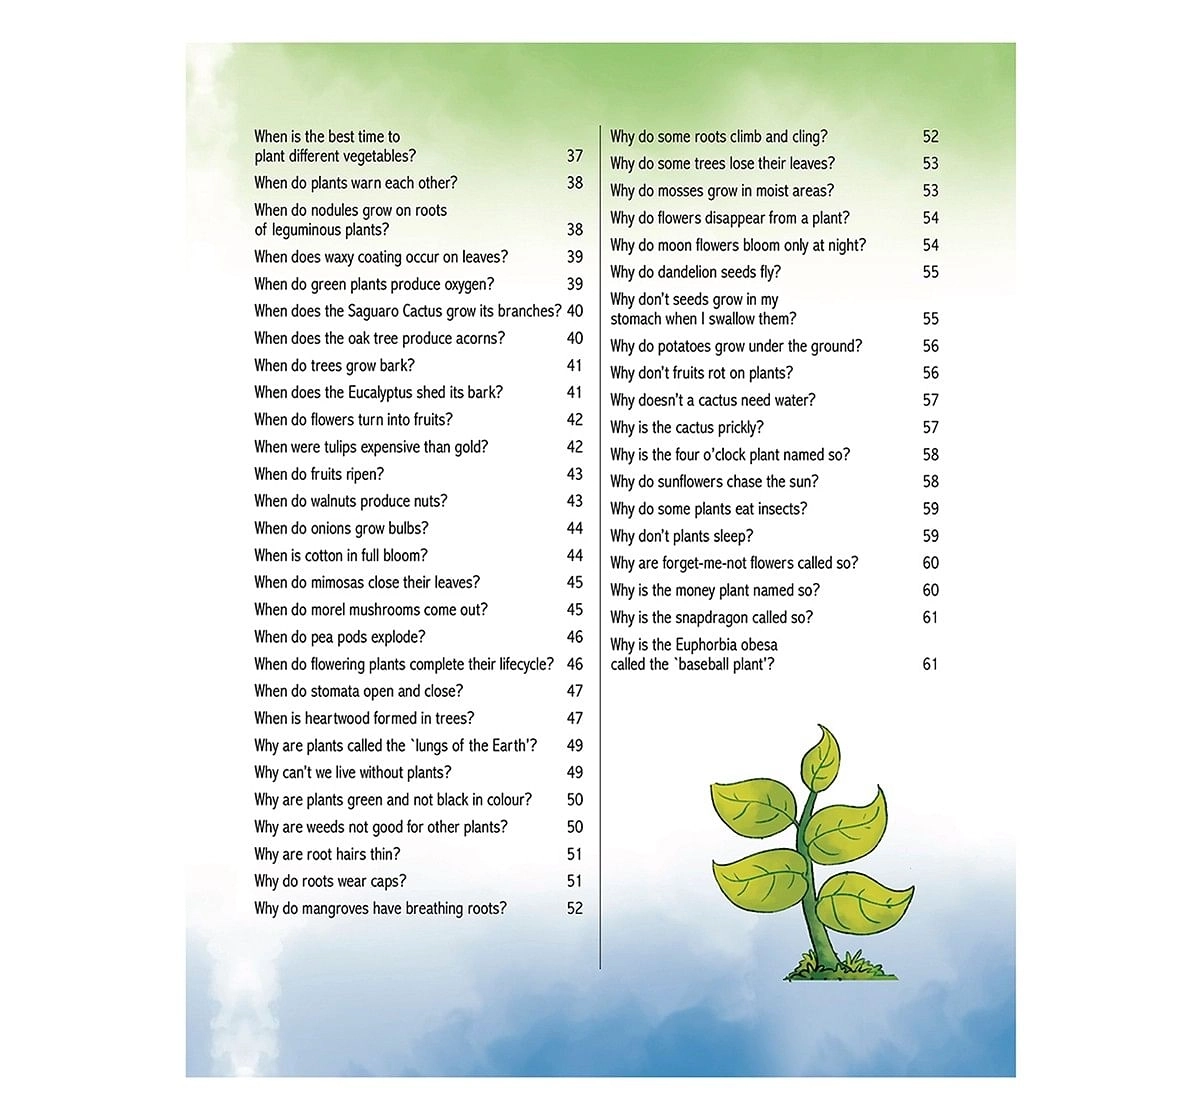 Encyclopedia: Amazing Questions & Answers Plants, 64 Pages Book, Paperback